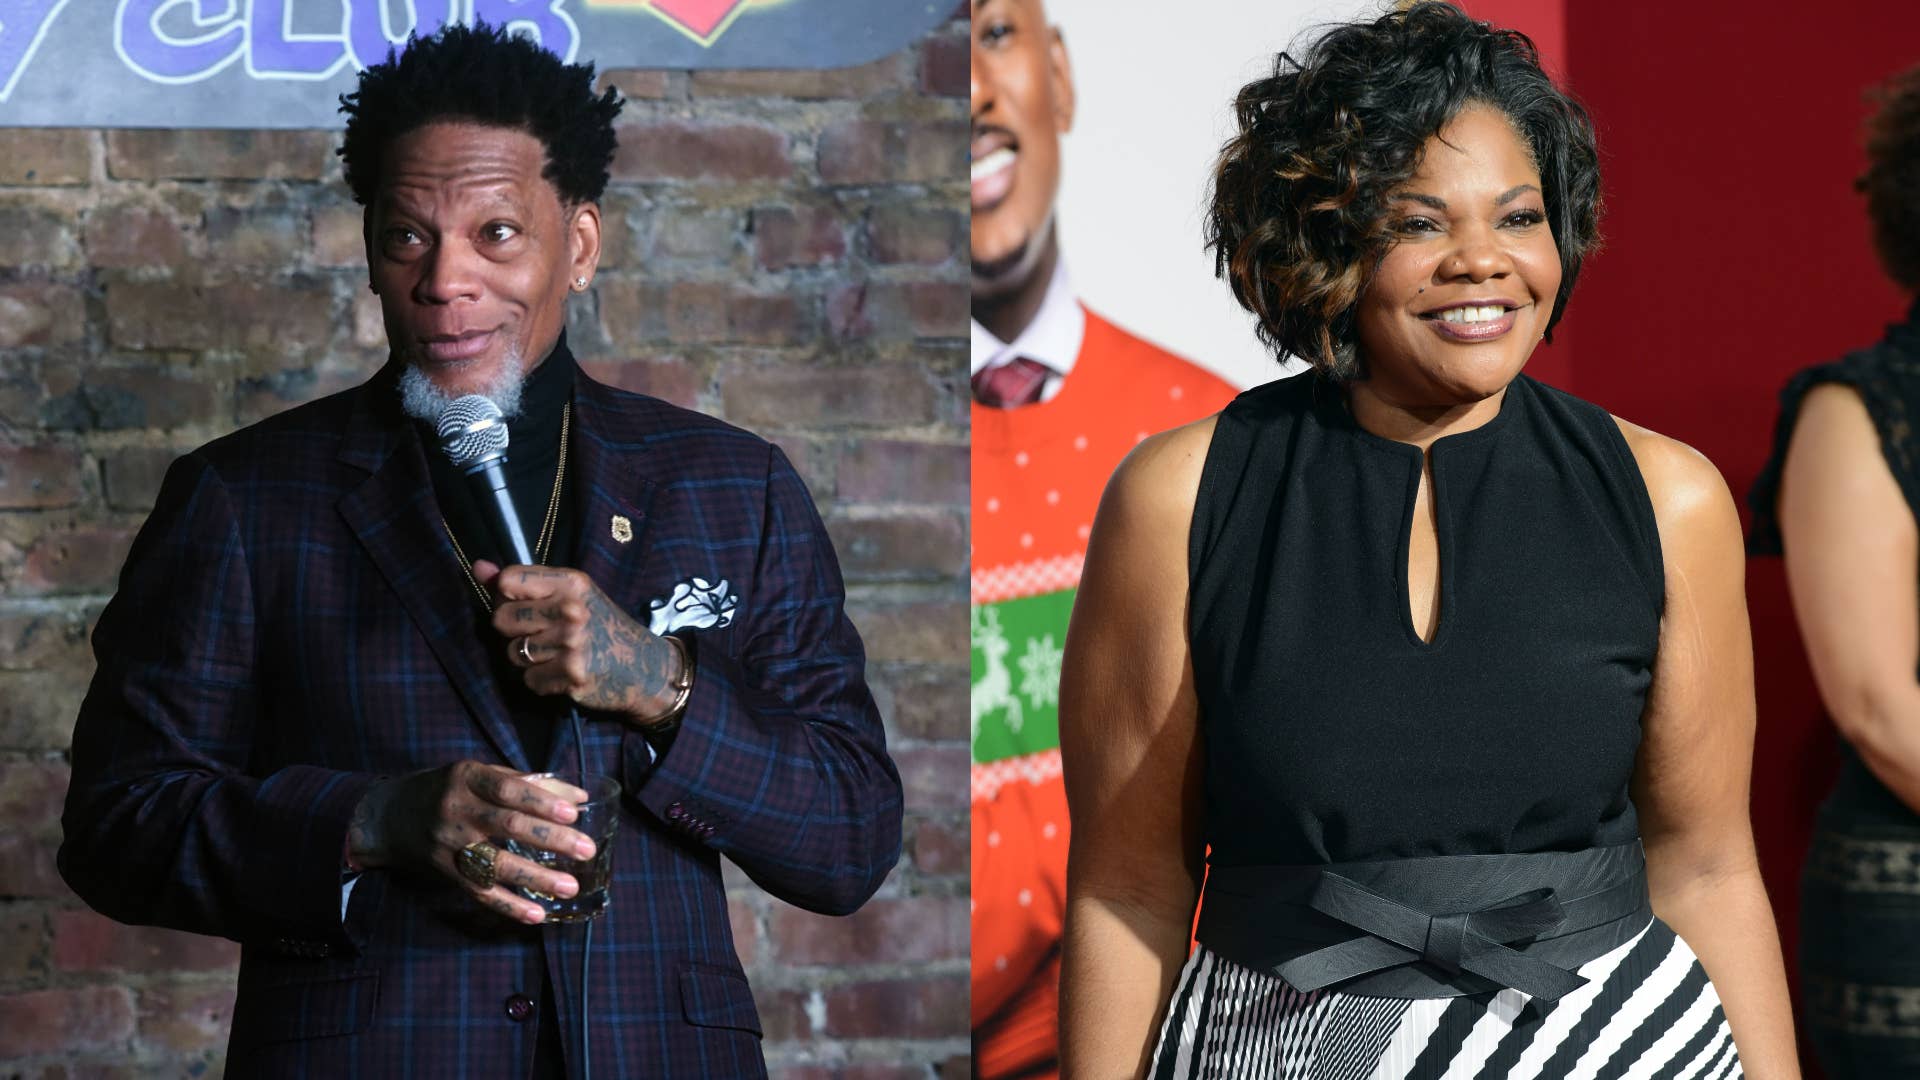 A splice of two photos showing comedians DL Hughley and MoNique are shown